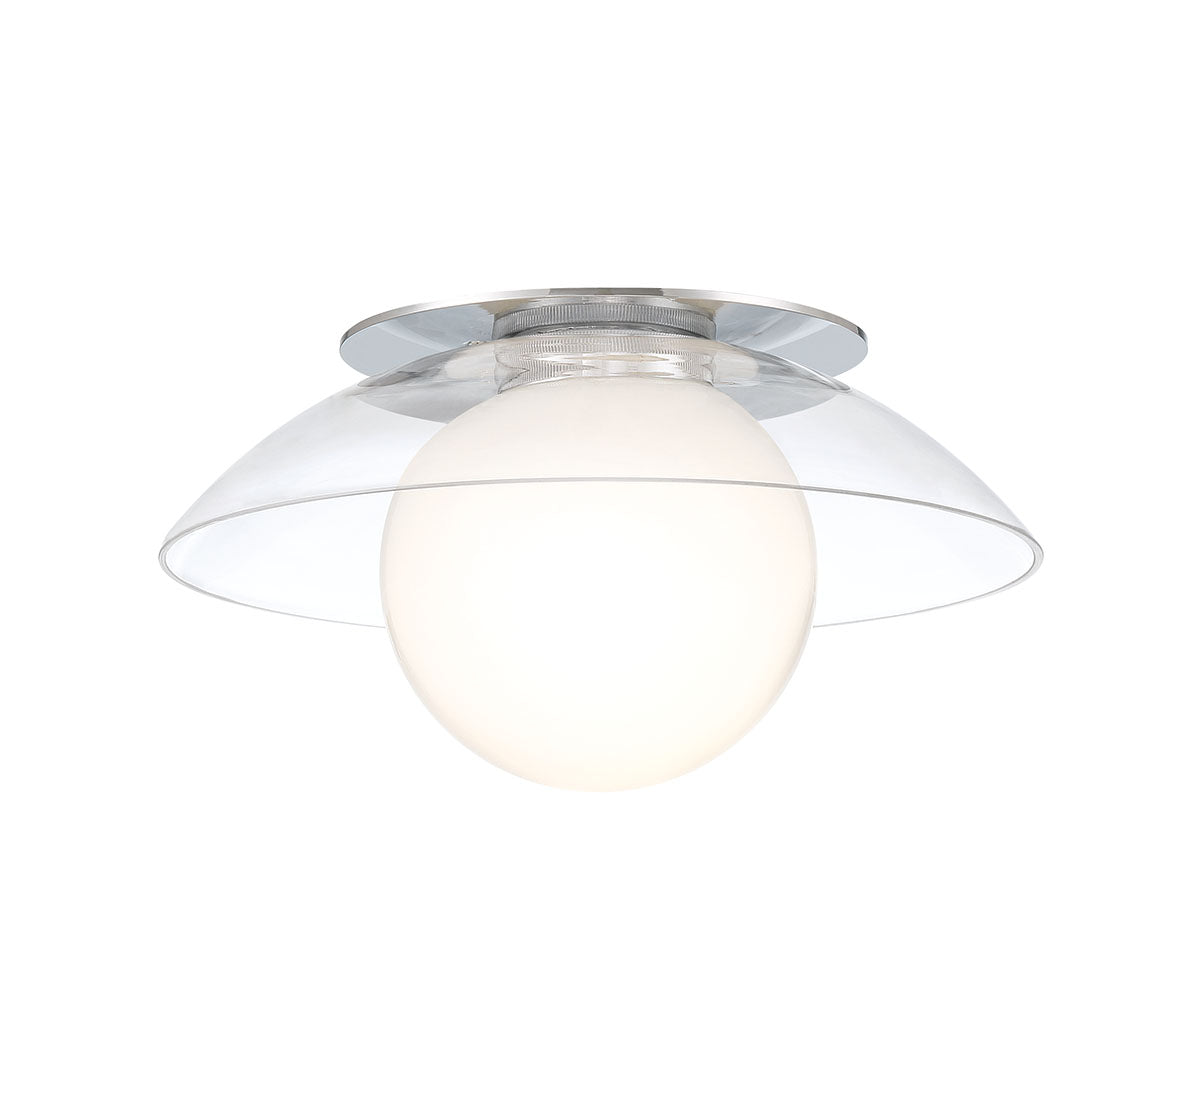 ANCONA 10125-06, Small 1 Light Ceiling/Wall Mount